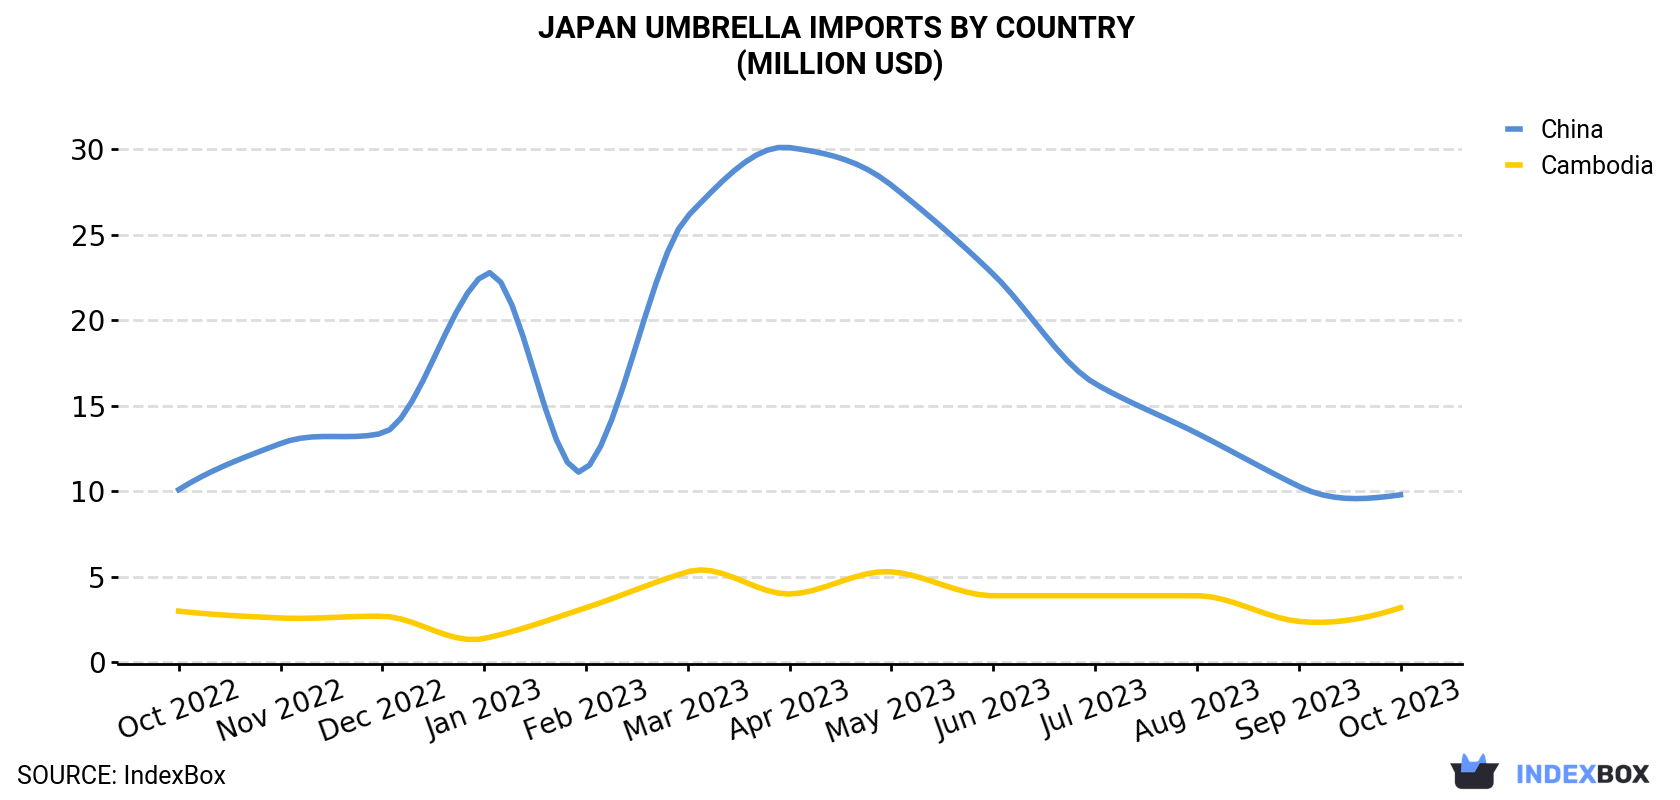 Japan Umbrella Imports By Country (Million USD)